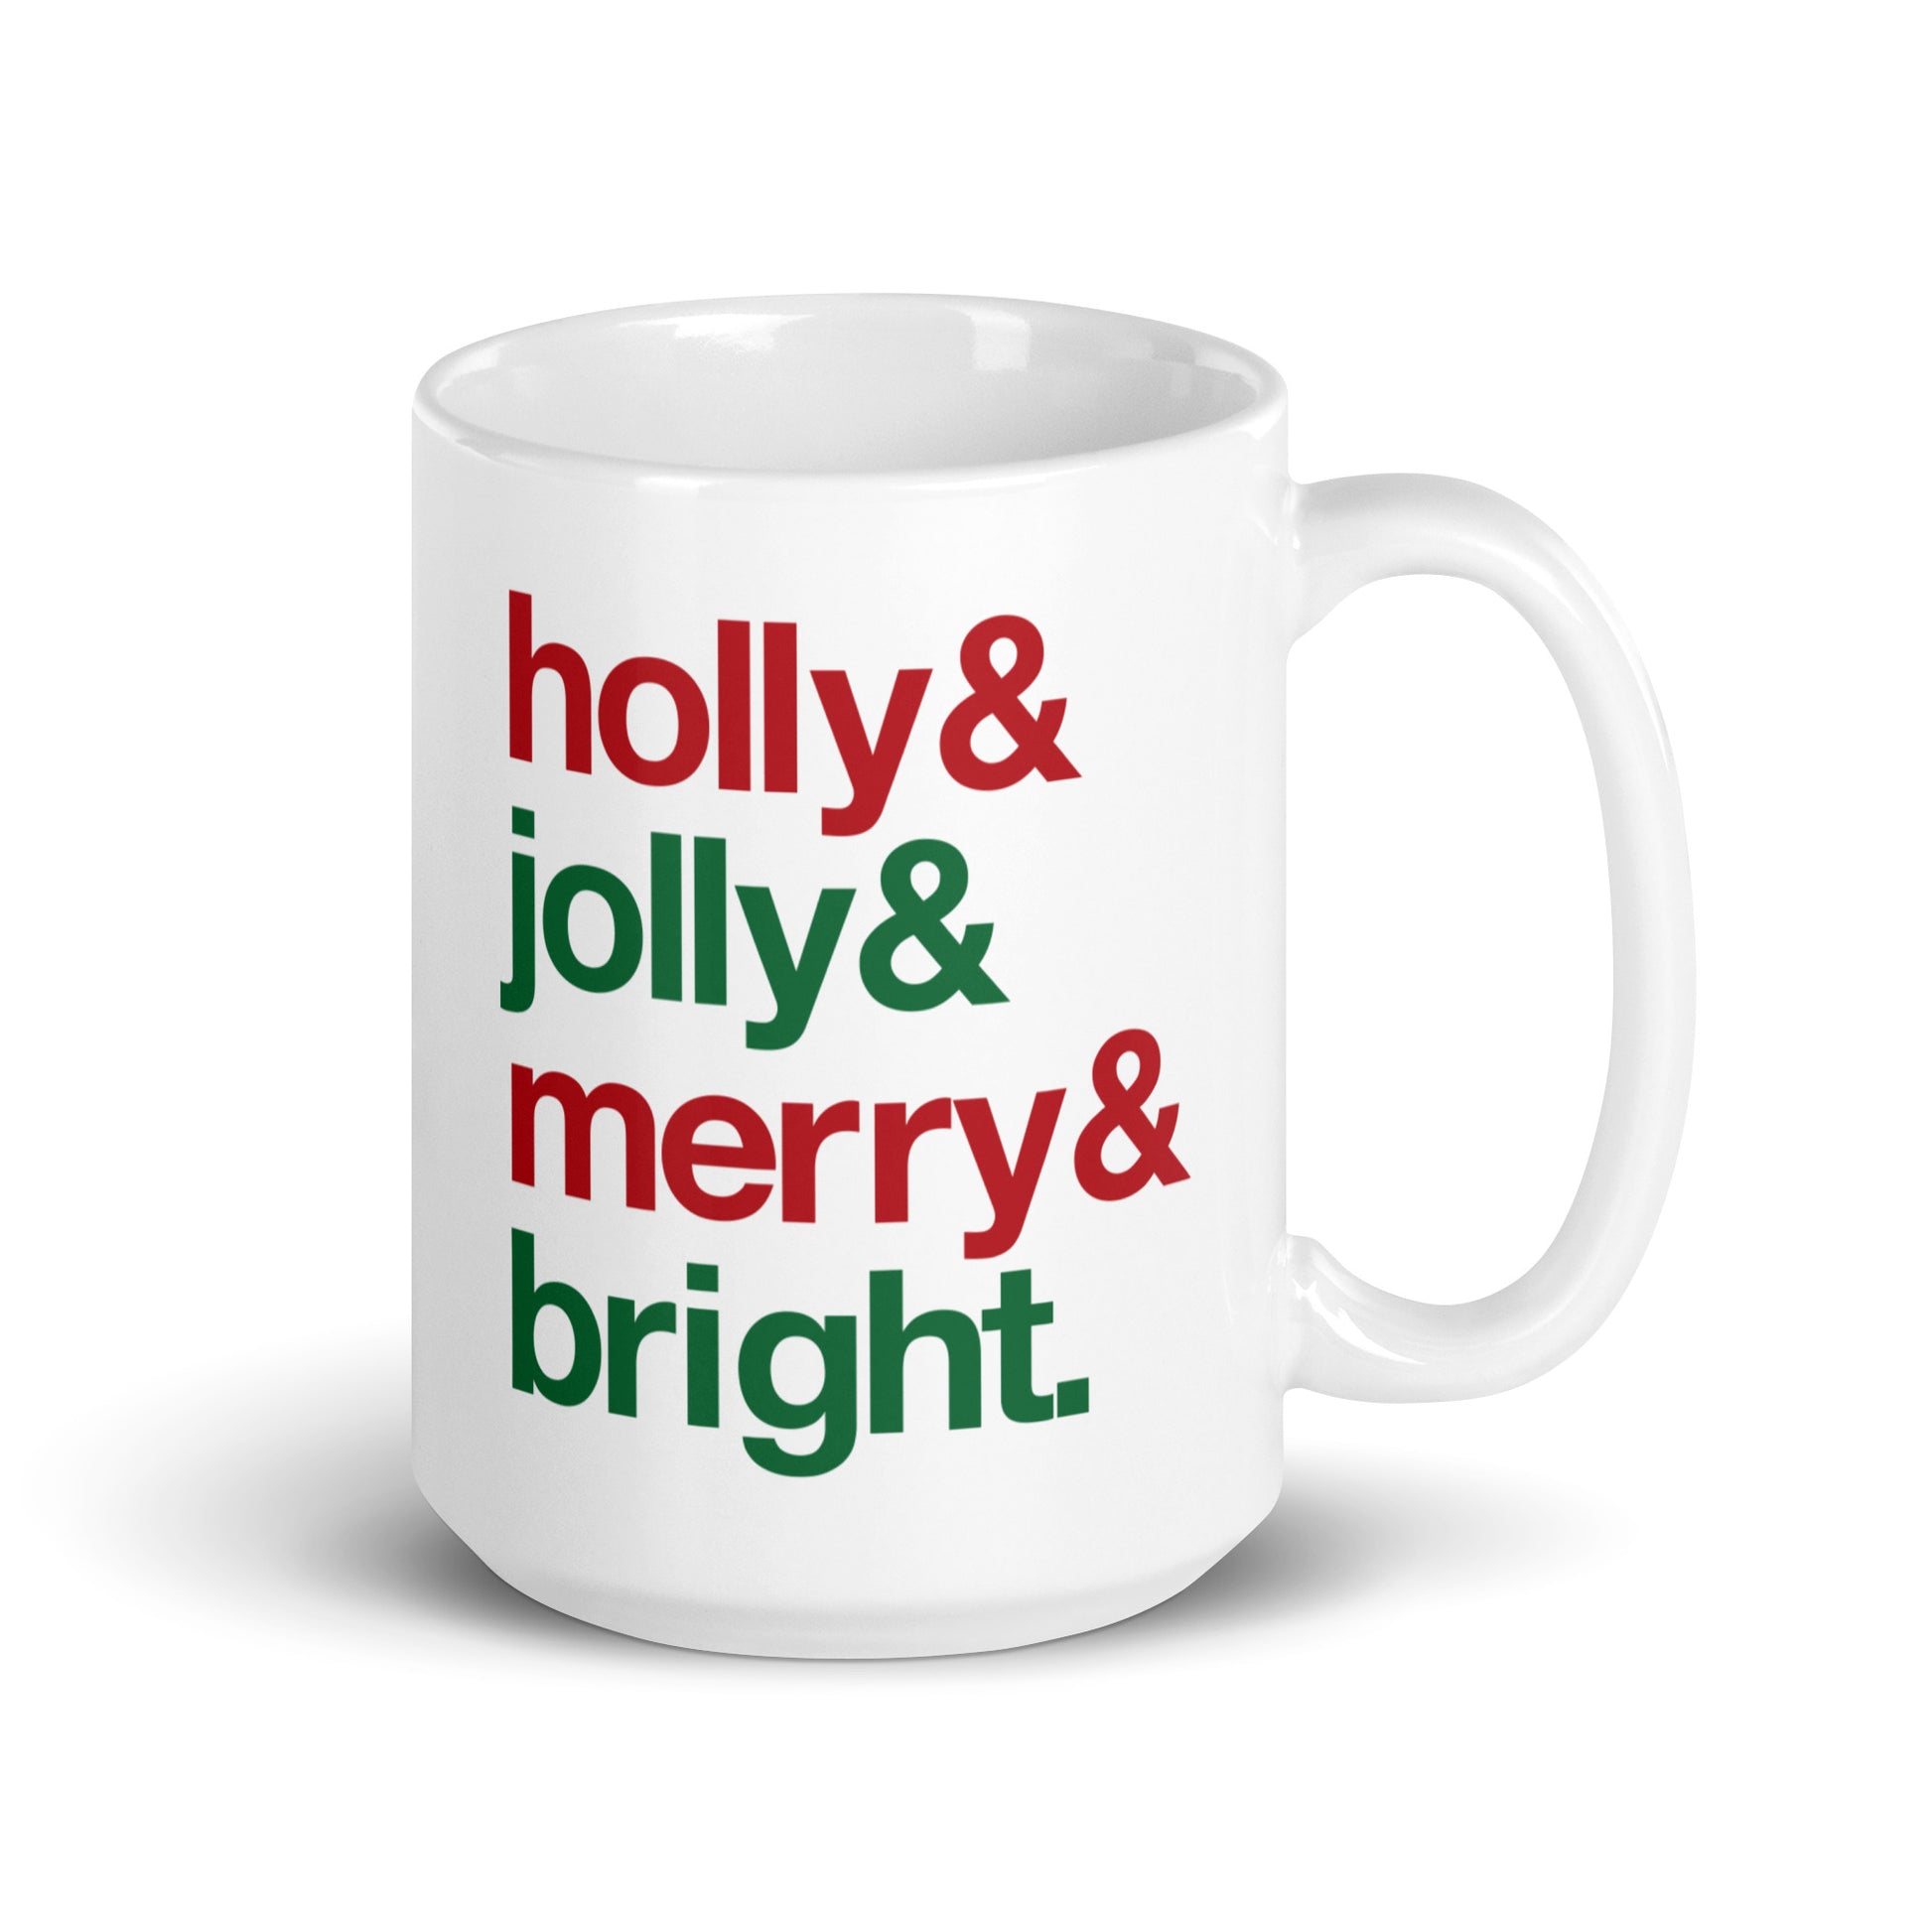 A white 15 ounce ceramic mug with four lines of red and green text that read "Holly & Jolly & Merry & Bright"